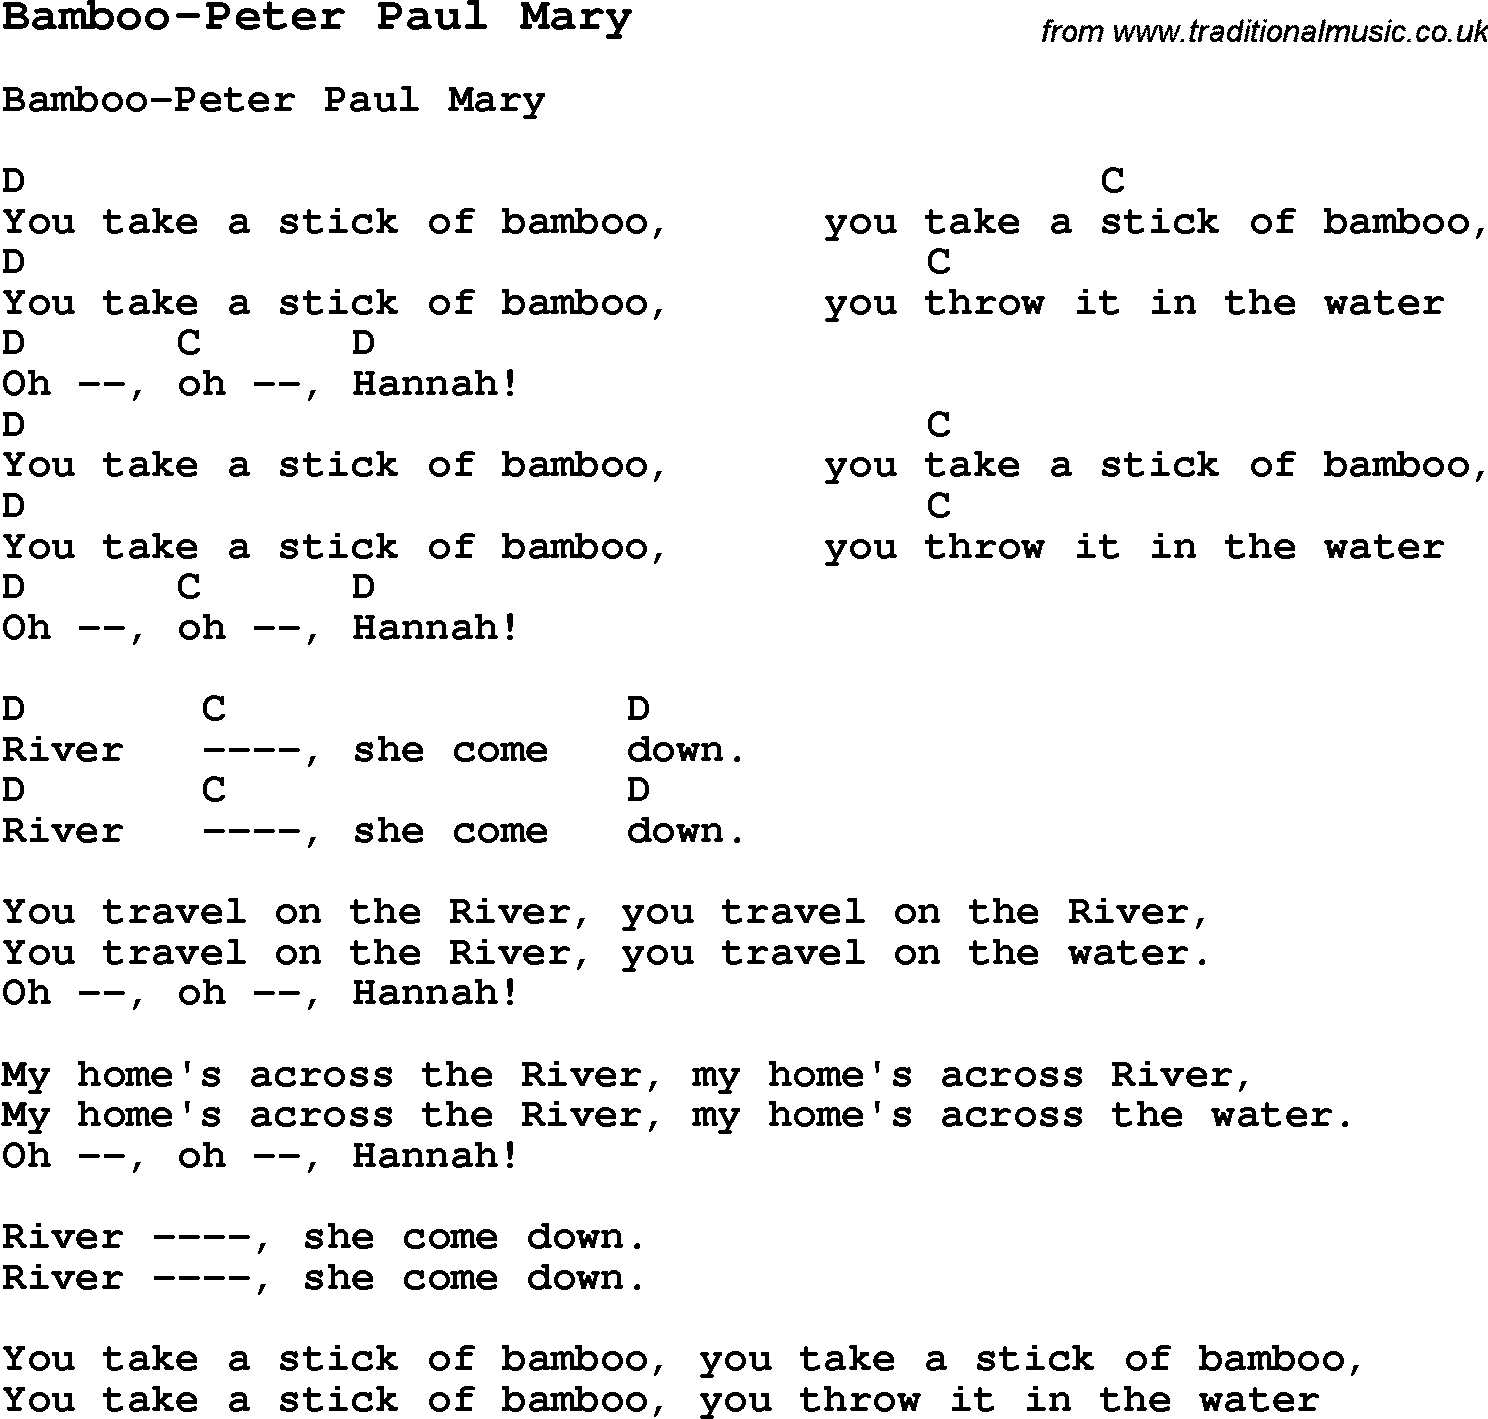 Summer-Camp Song, Bamboo-Peter Paul Mary, with lyrics and chords for Ukulele, Guitar Banjo etc.